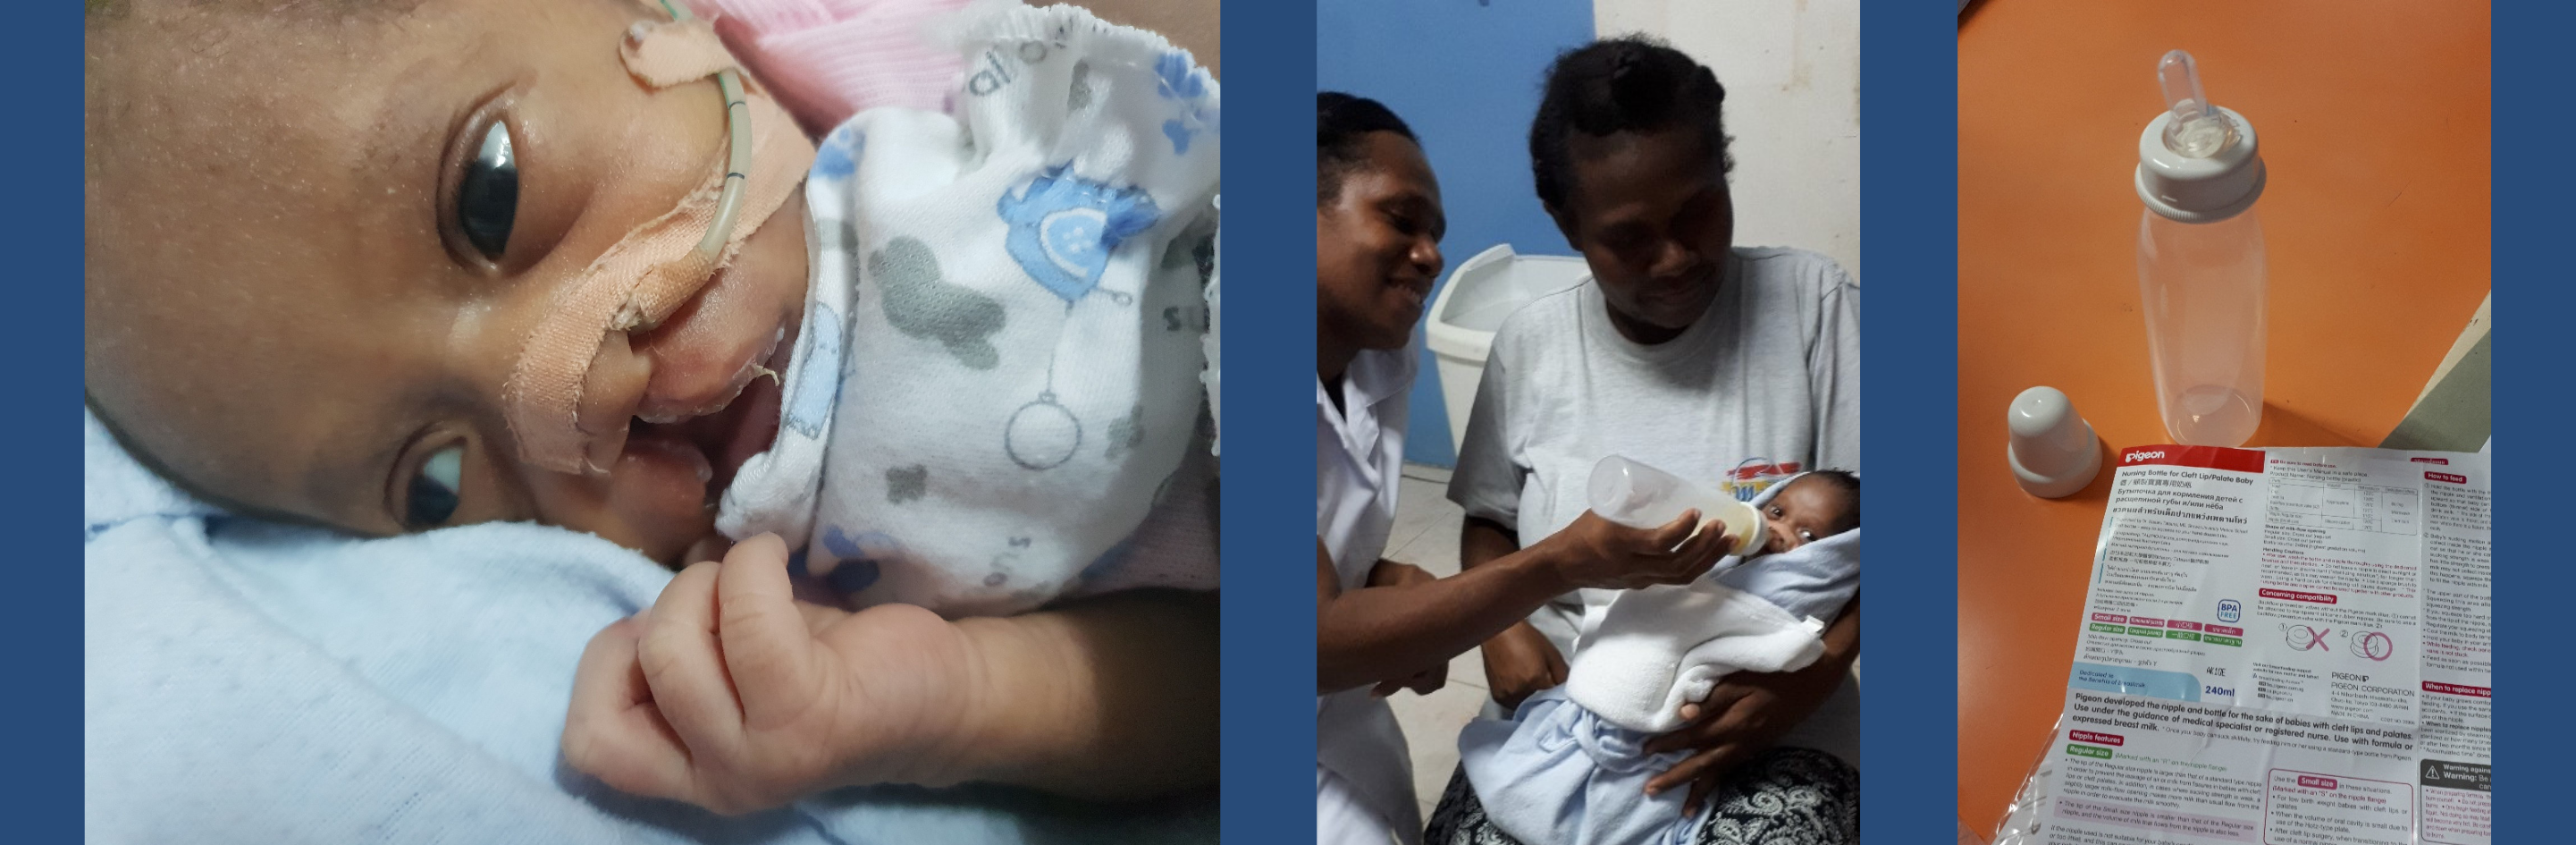 The Smile Vanuatu team help airlift a special feeding bottle designed for cleft palate sufferers to Norsup Hospital.